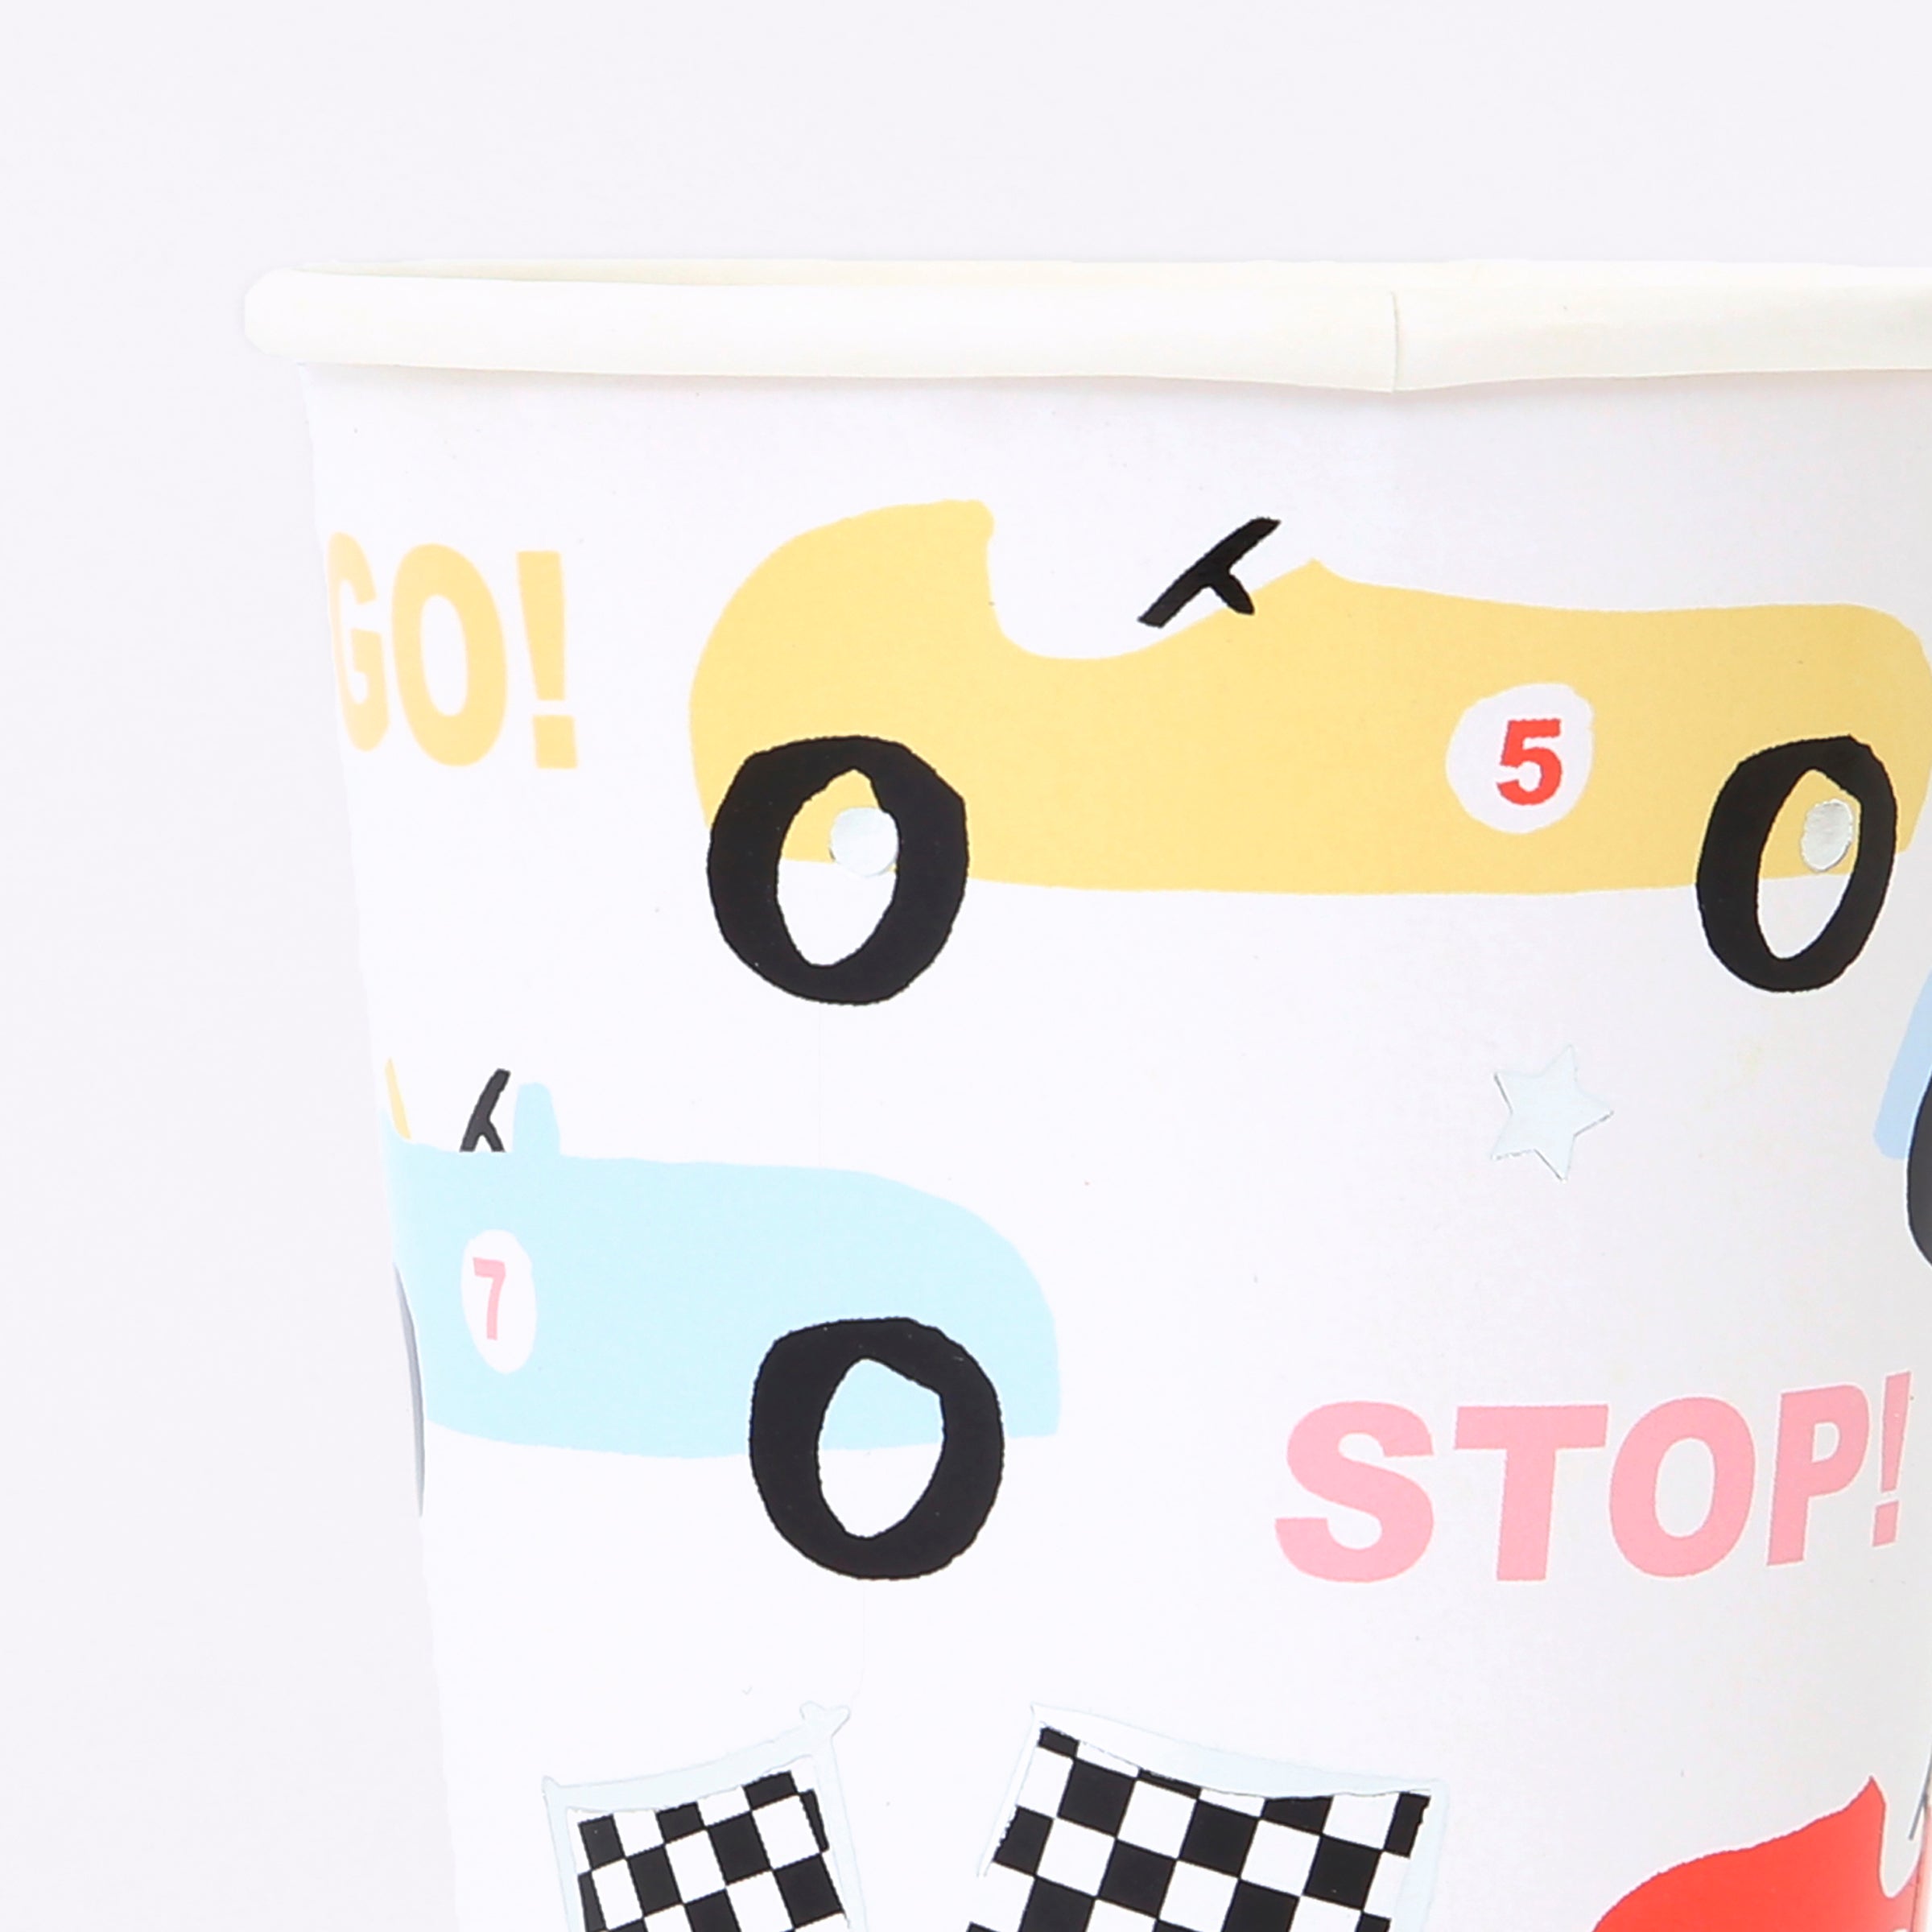 Our party cups are perfect for boys birthday party ideas.